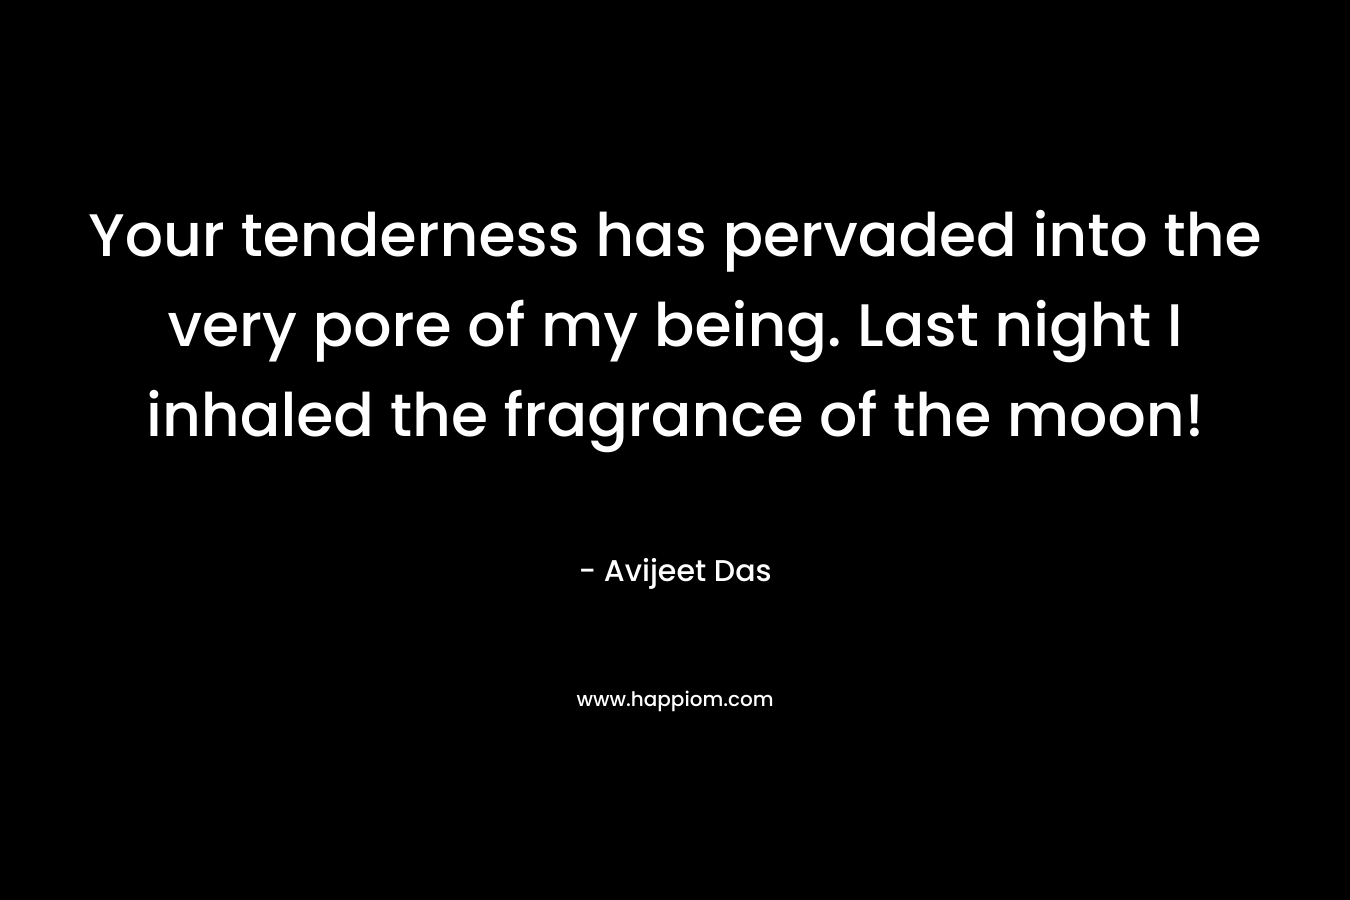 Your tenderness has pervaded into the very pore of my being. Last night I inhaled the fragrance of the moon! – Avijeet Das